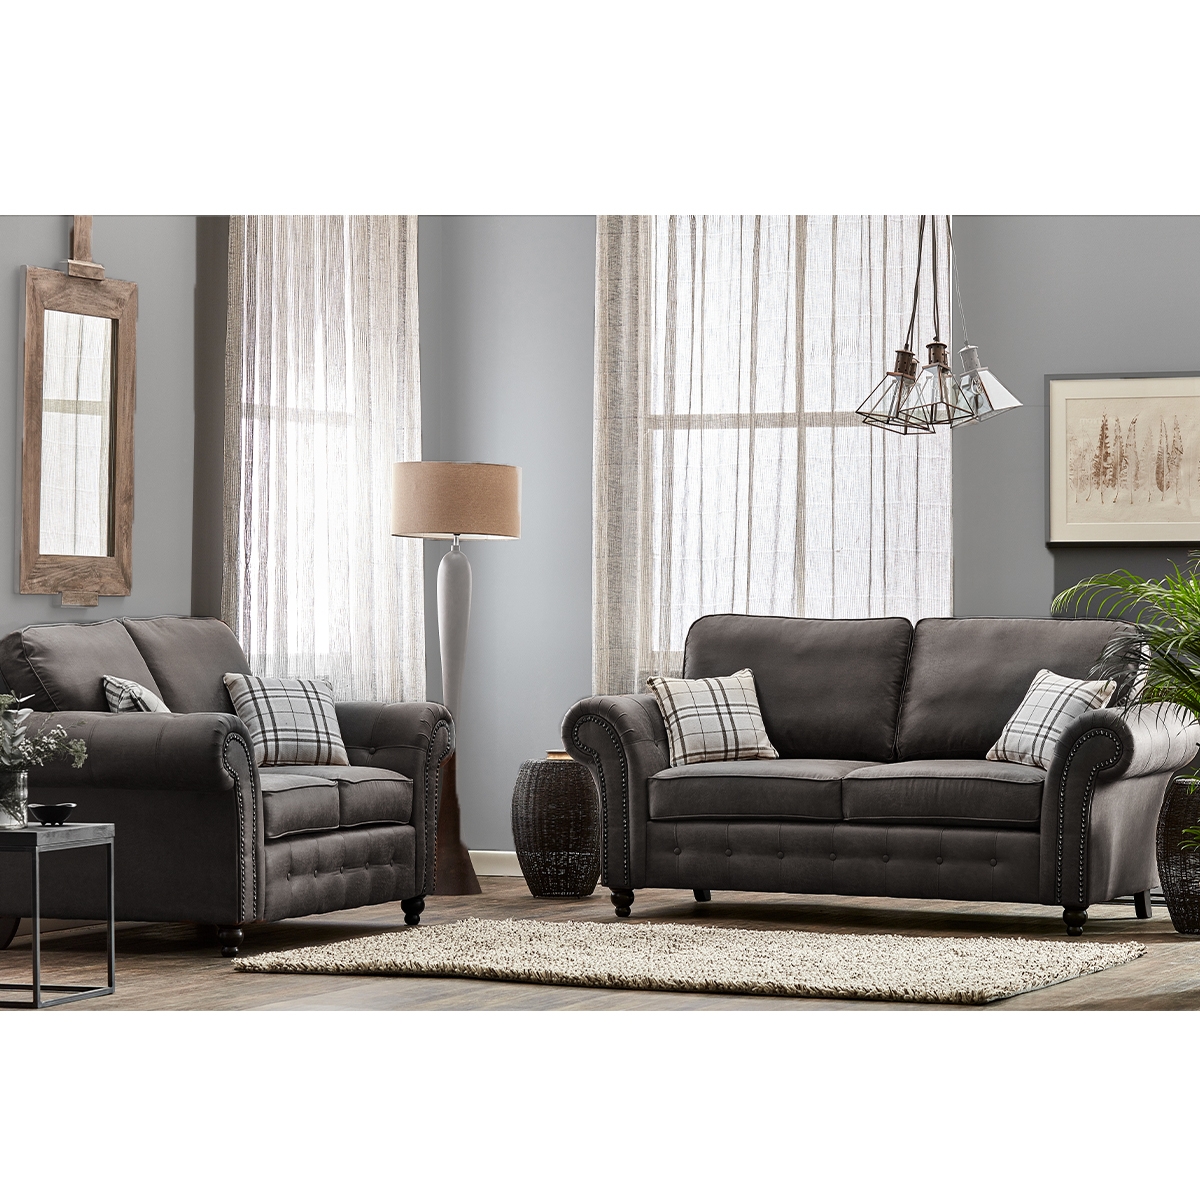 Oakland Leather 3 + 2 Sofa Suite – Charcoal Grey – The Online Sofa Shop